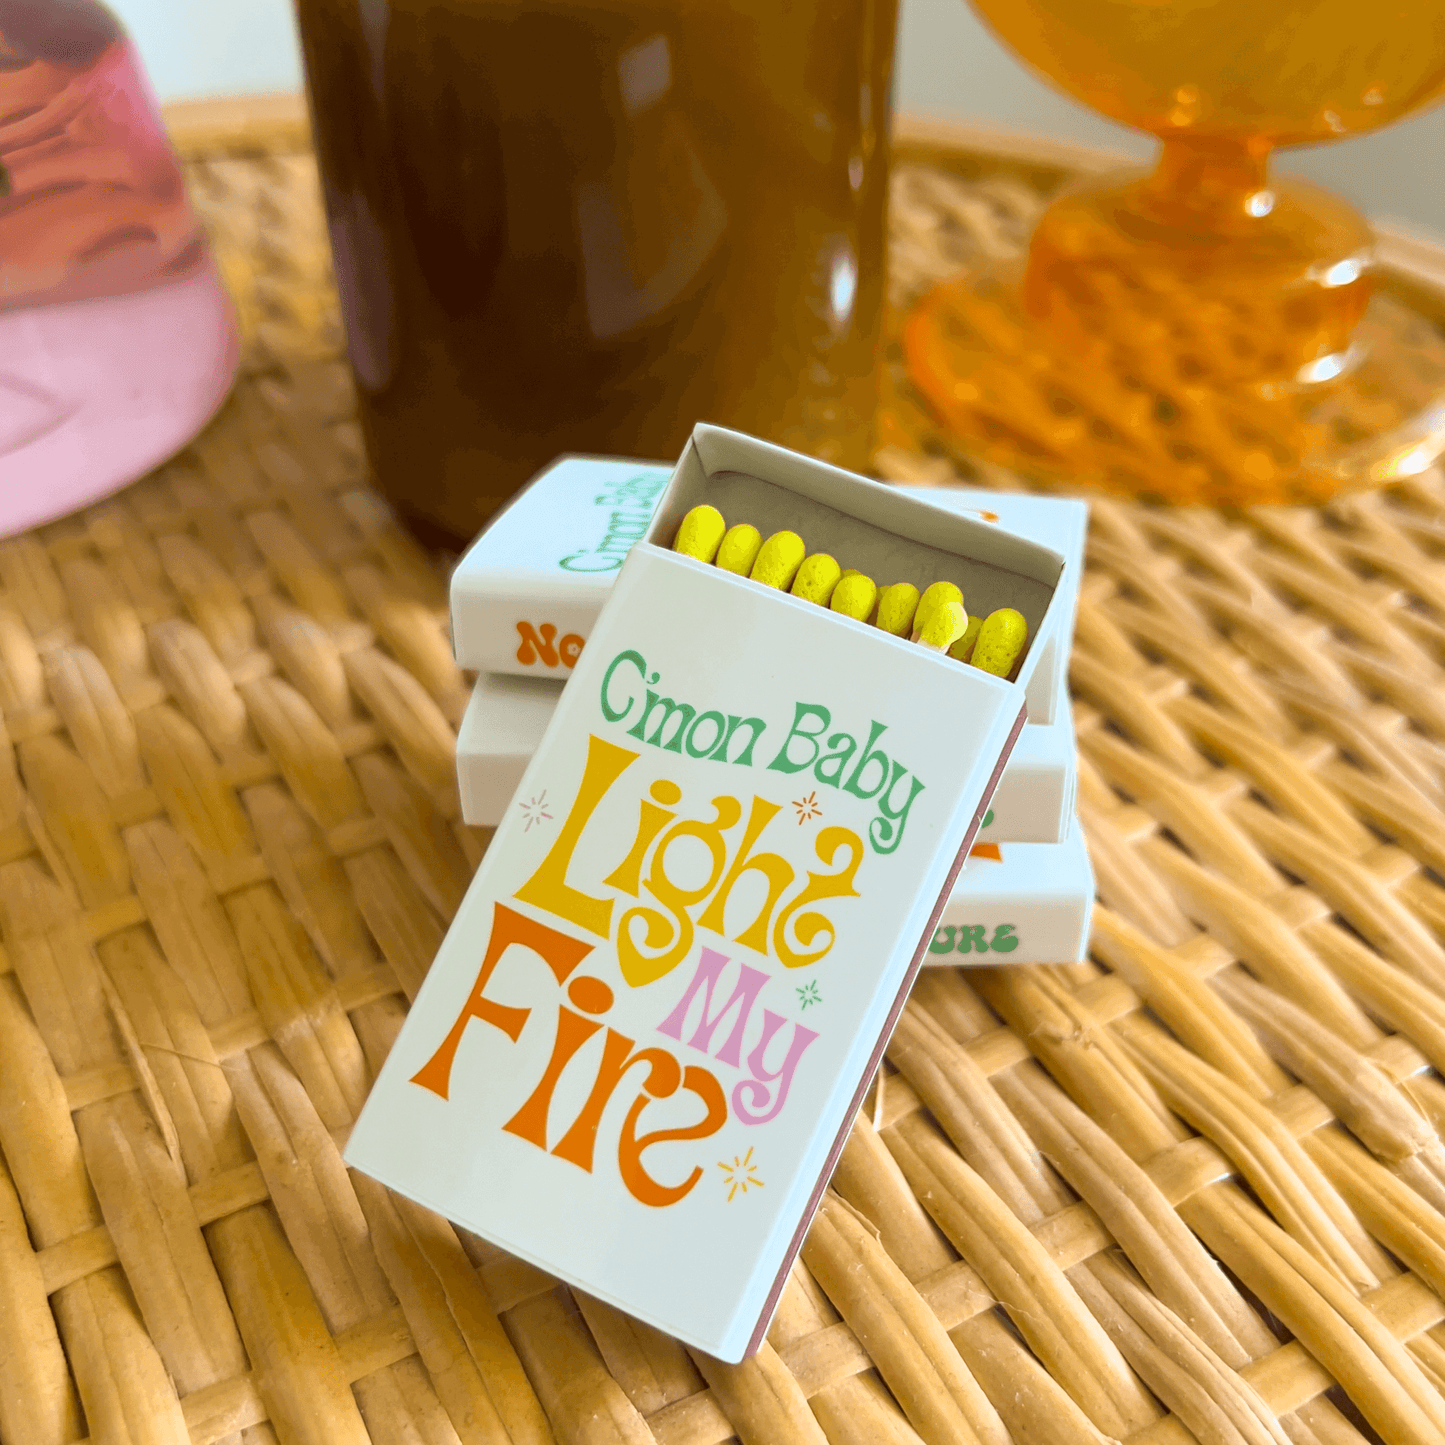 Matchbox on wicker table with come on baby light my fire text graphic. Yellow tipped matches